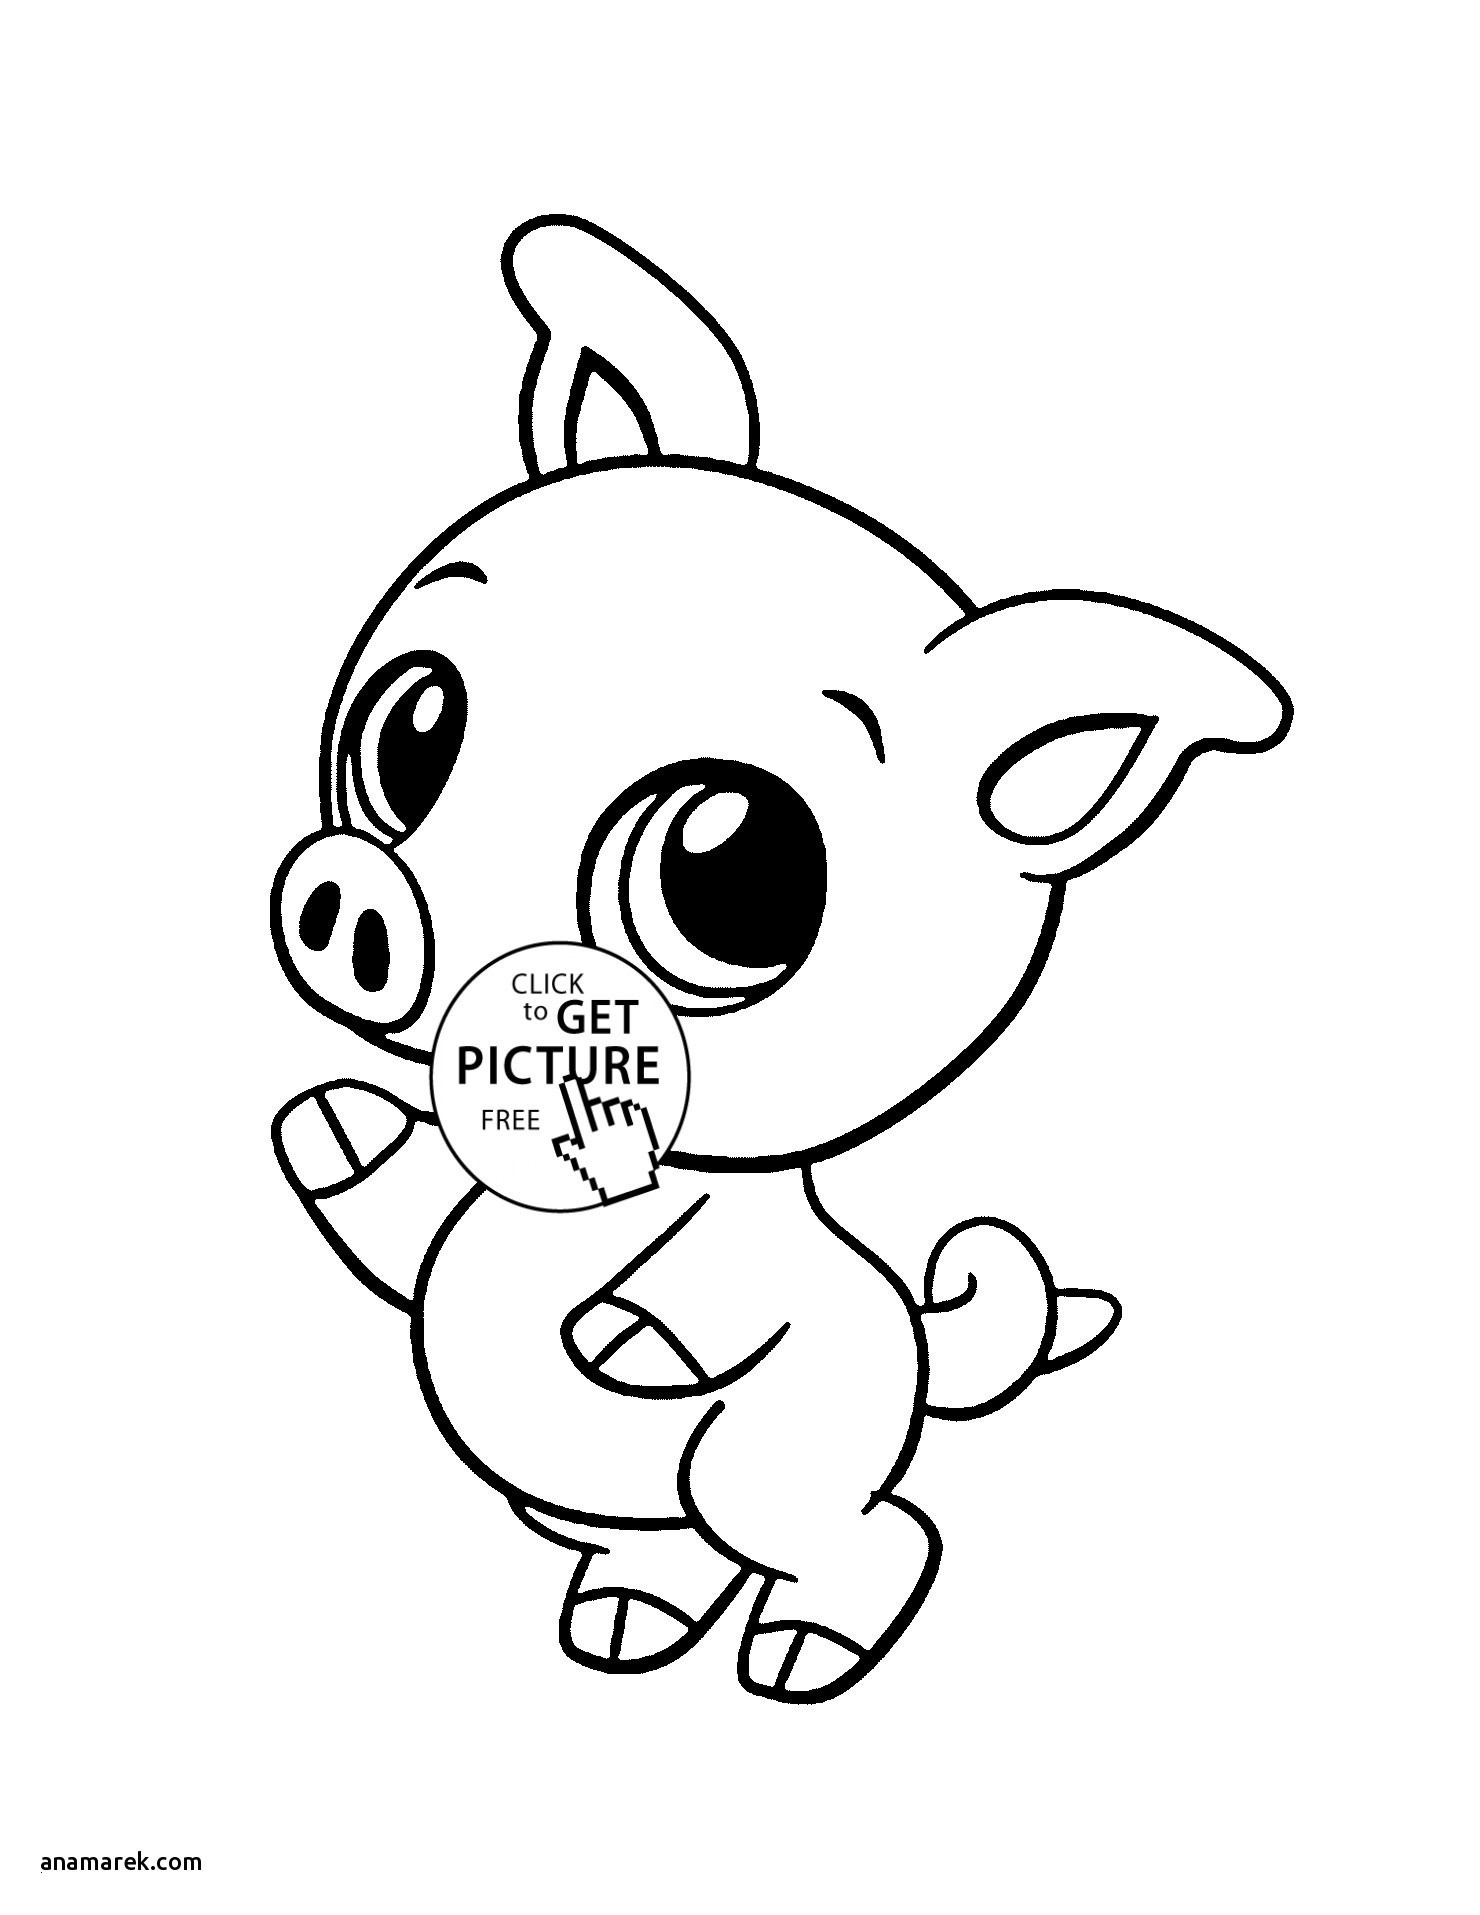 Baby Animal Coloring Pages Lovely Fresh Media Cache Ec0 Pinimg originals 2b 06 0d – Fun